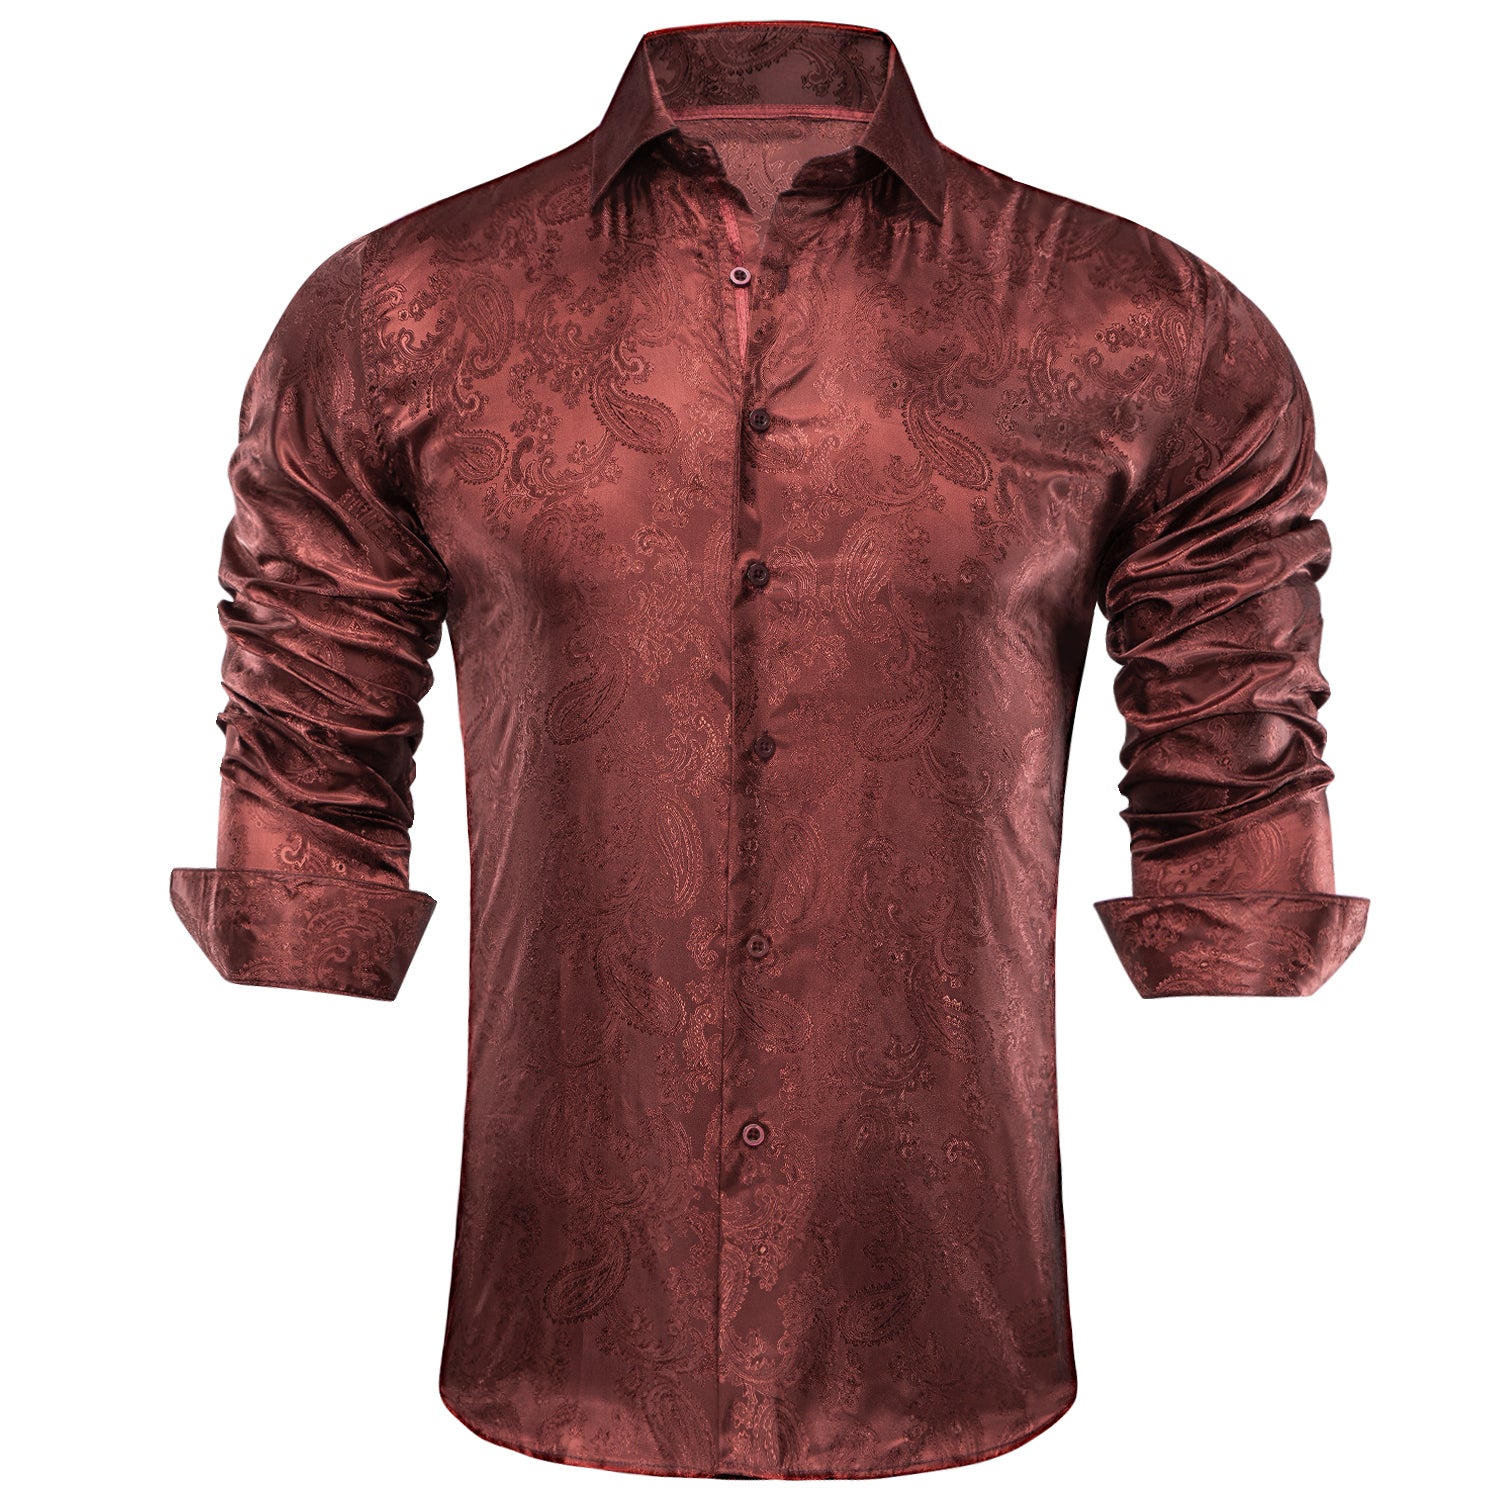 Clearance Sale New Brown Red Paisley Silk Men's Long Sleeve Shirt